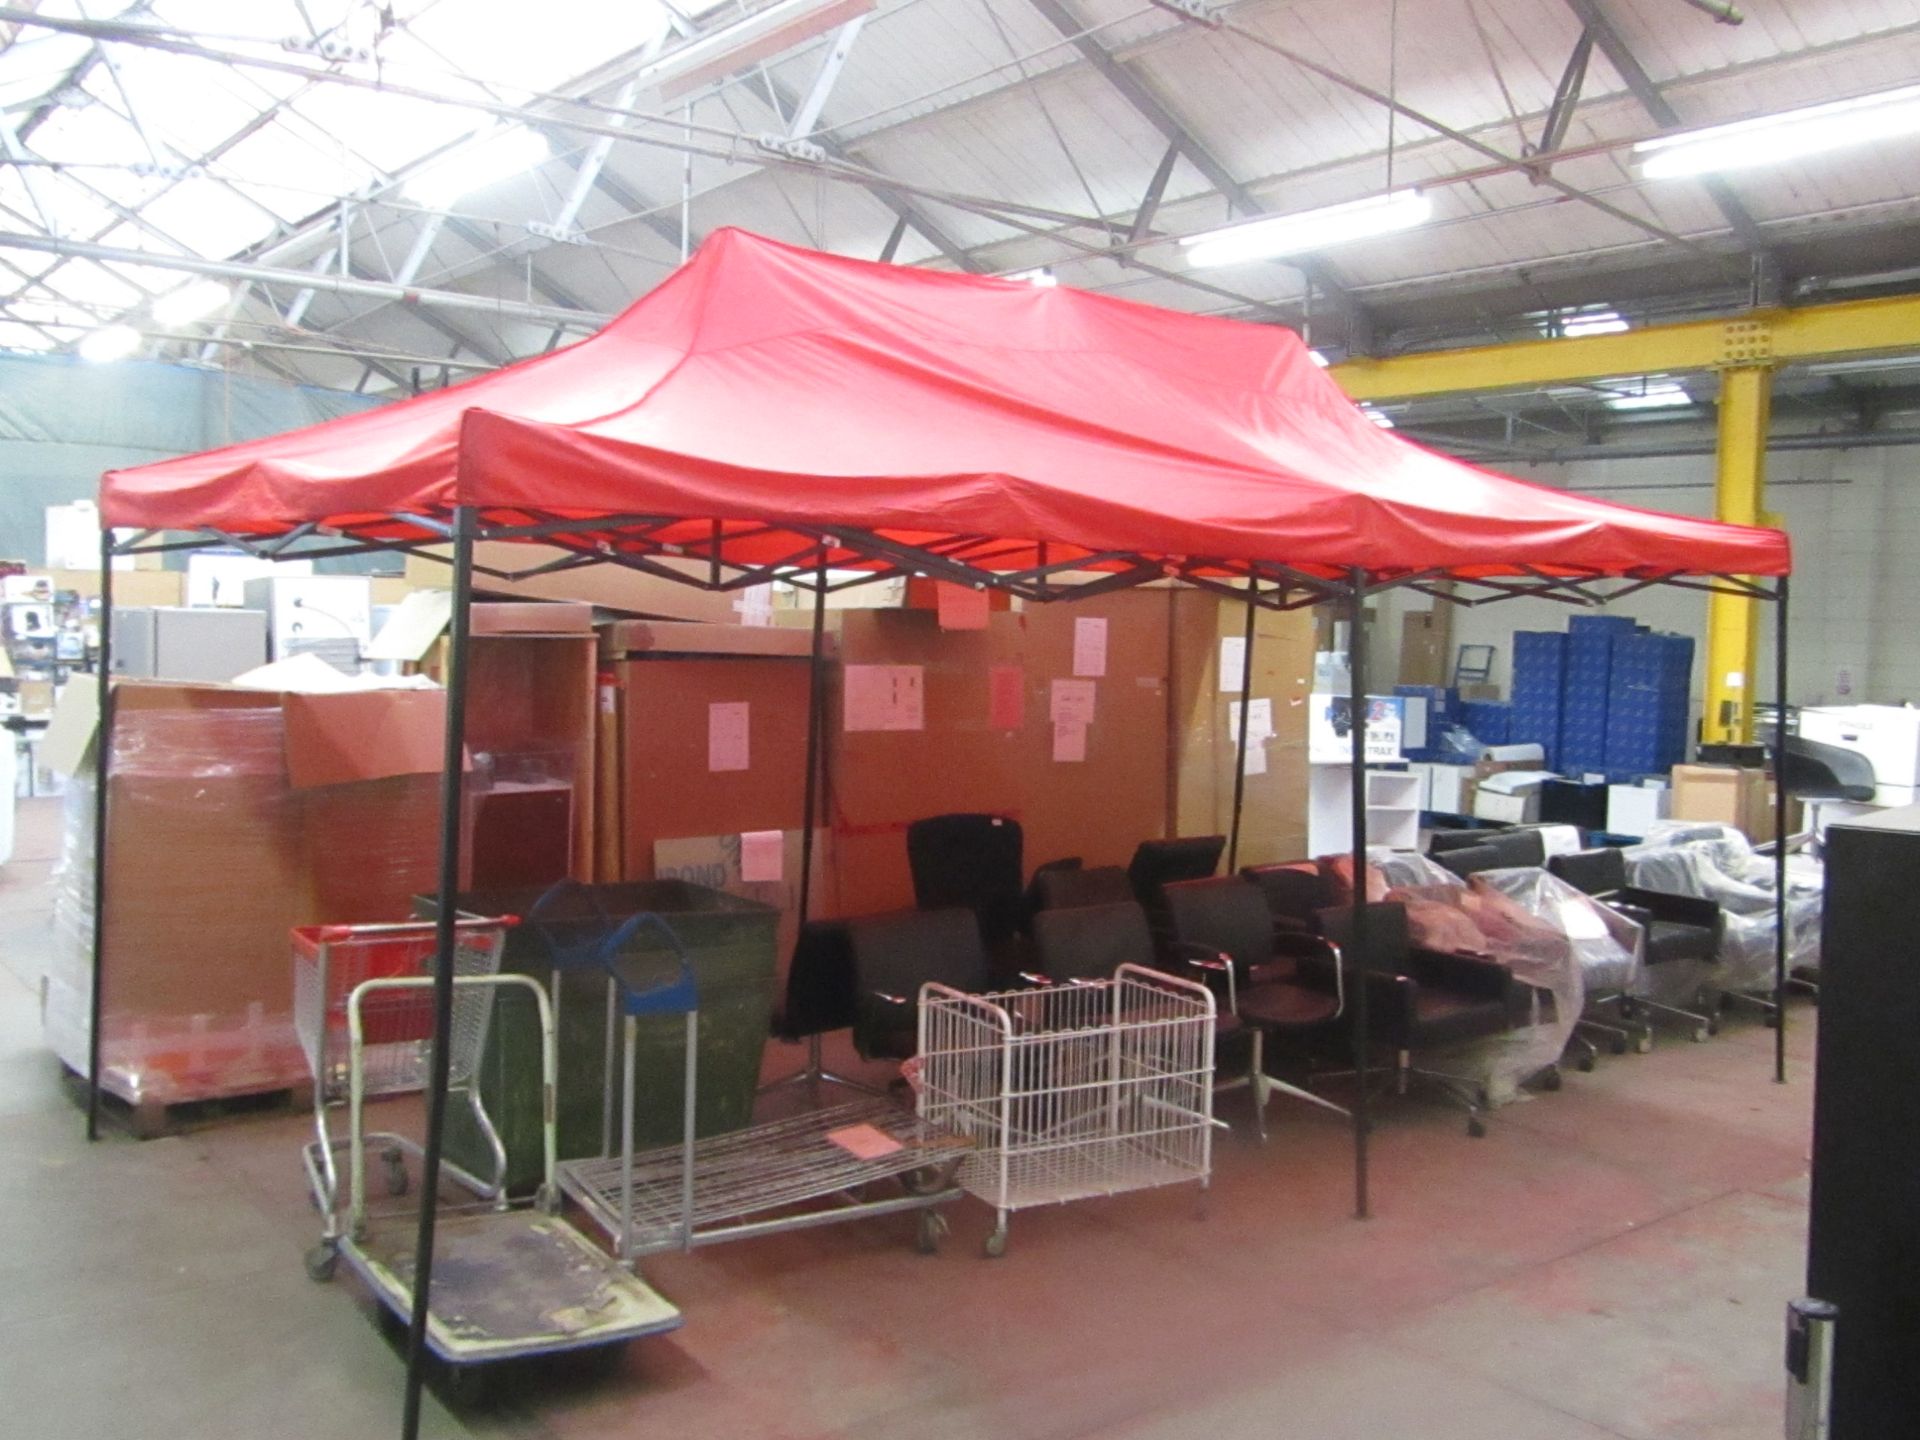 6mtr x 3mtr pop up gazebo with red cover, new and boxed